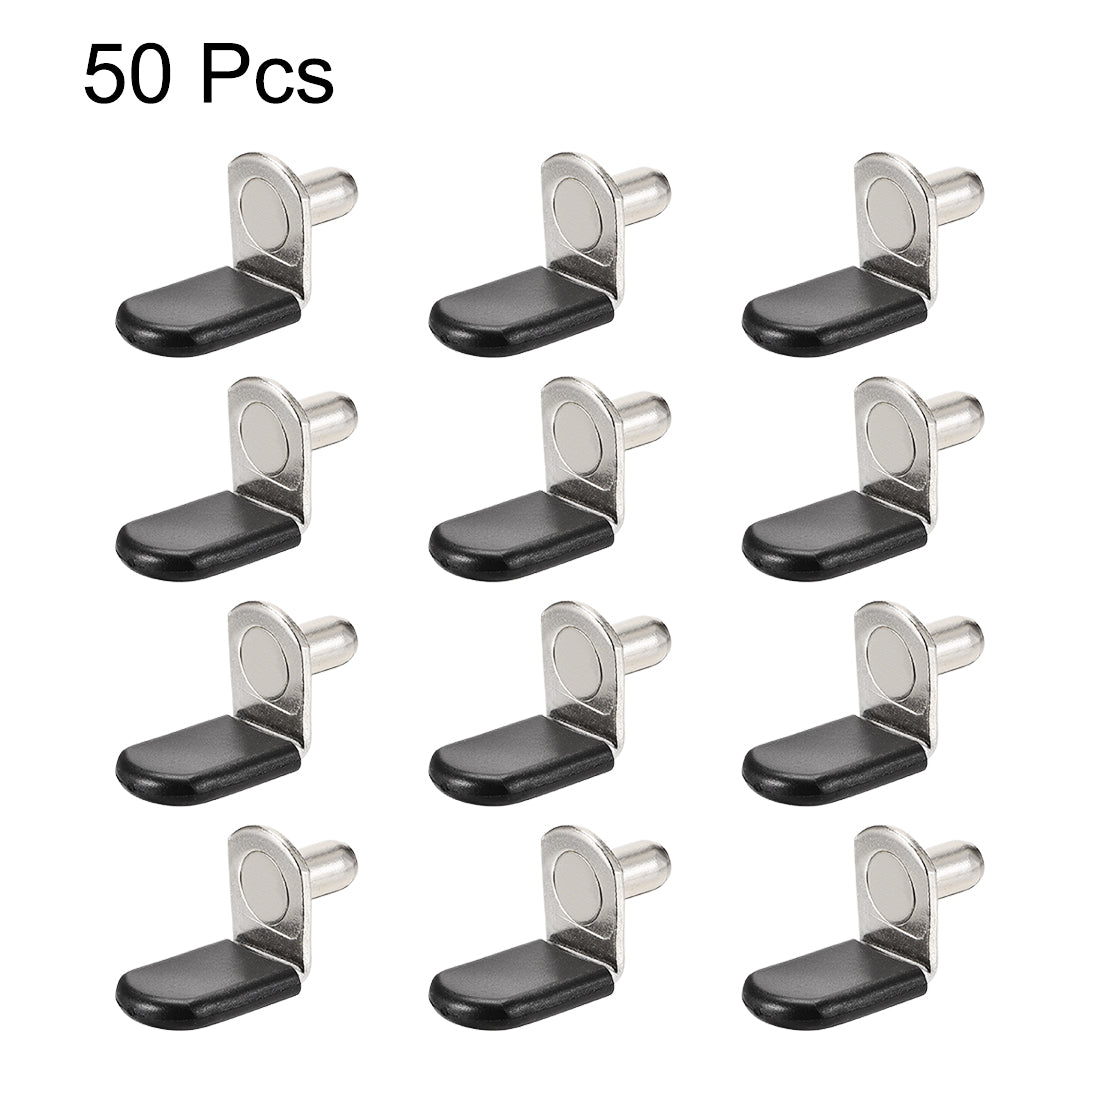 uxcell Uxcell Shelf Support Peg,6mm L-Shaped Support, Furniture Cabinet Shelf,Bracket Pegs w Sleeve,for Kitchen Furniture Book Shelves Supplies,Silver Tone 50pcs